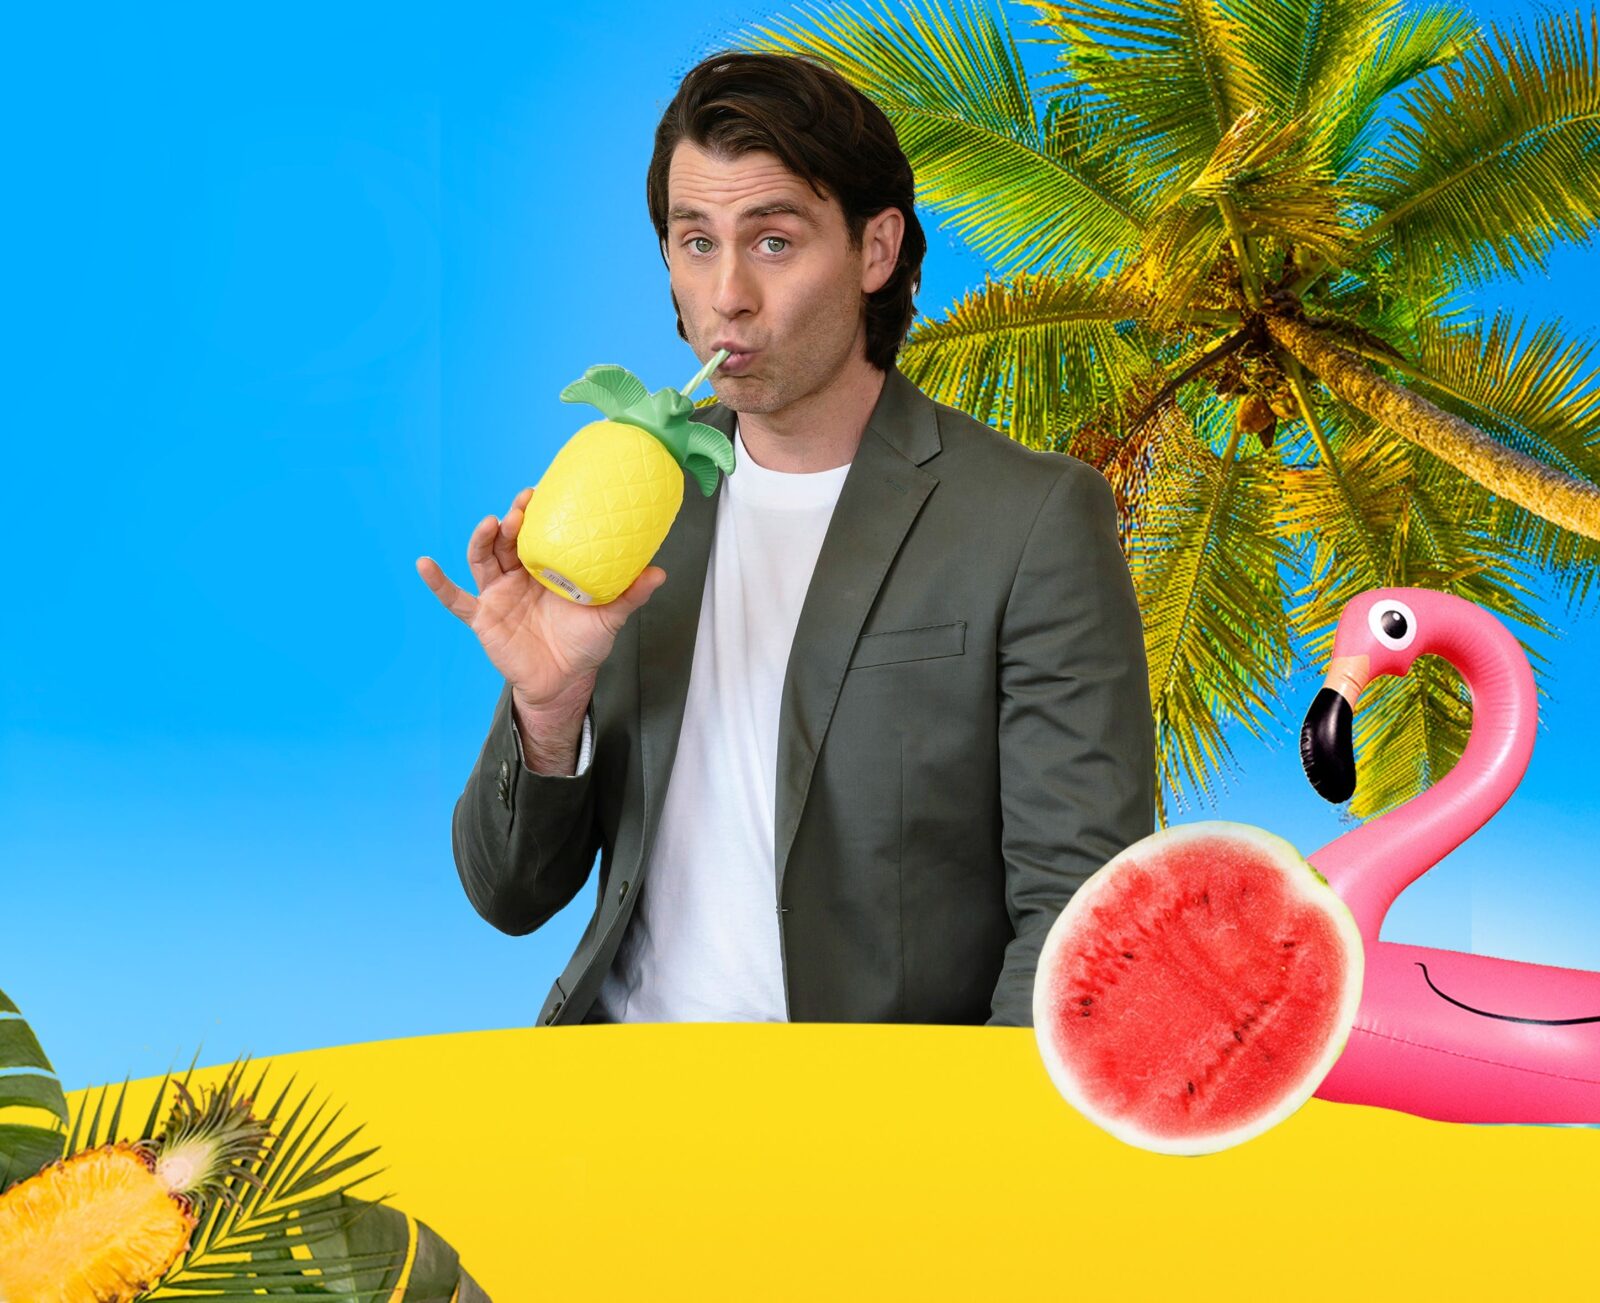 Jimmy, is dressed in a jacket, on a beach, drinking from a pineapple